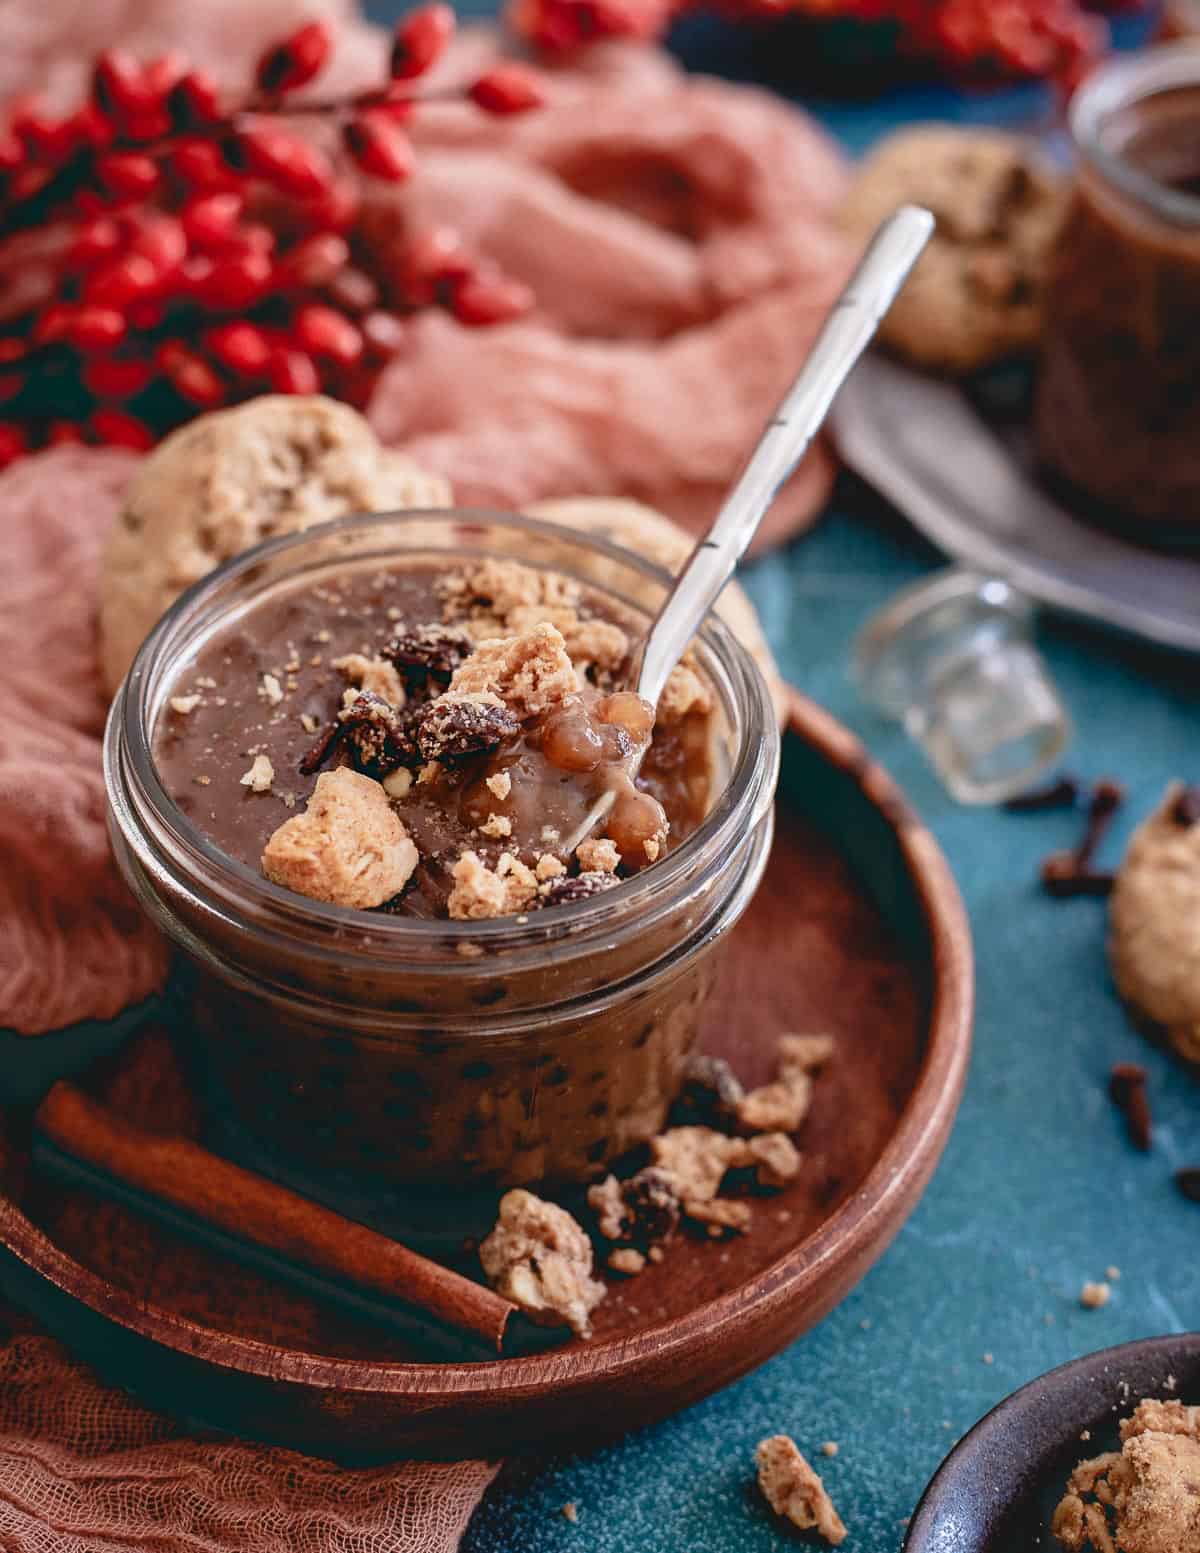 If you love texture, this dirty chai tapioca pudding with oatmeal raisin cookie crumbles is the perfect dessert for you!